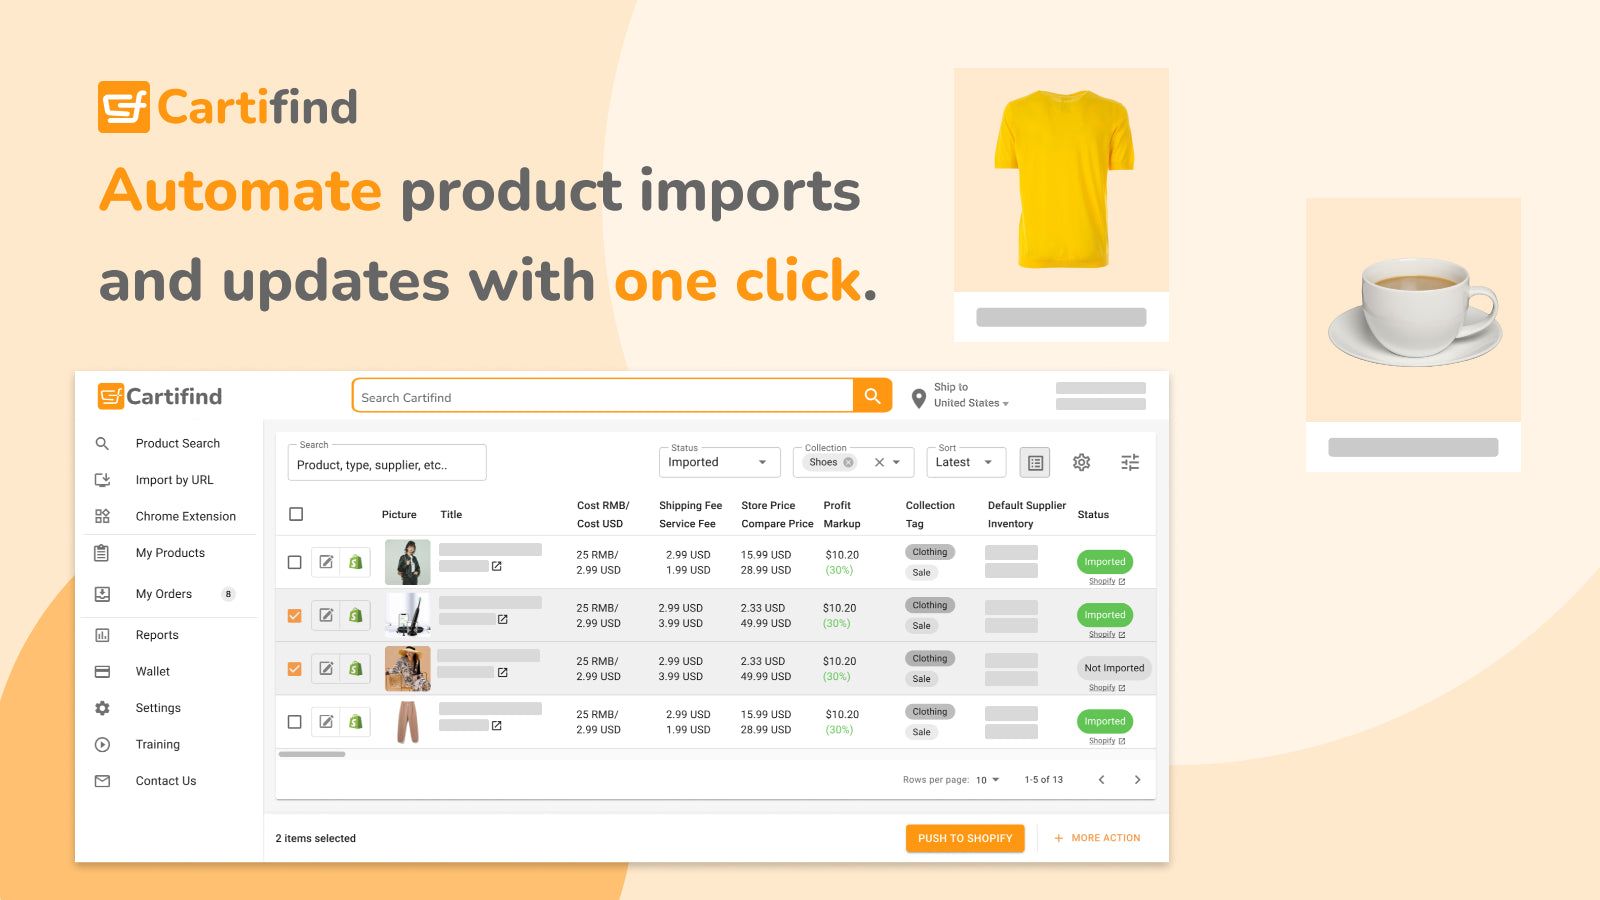 My Products - Cartifind saved product lists